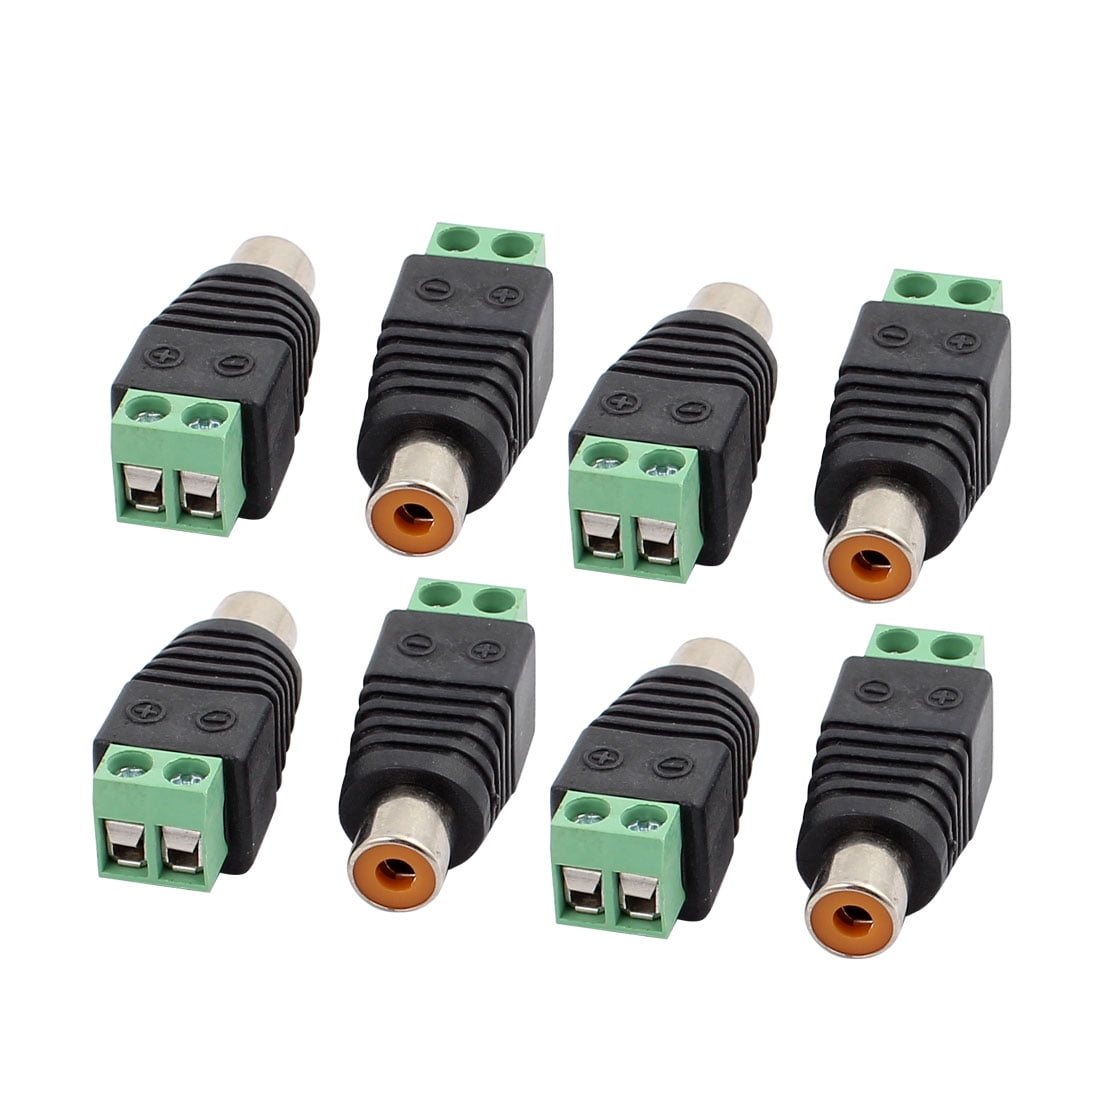 BNC FEMALE CONNECTOR ADAPTER CCTV CAT5 SCREW TERMINALS  EASY FIT 